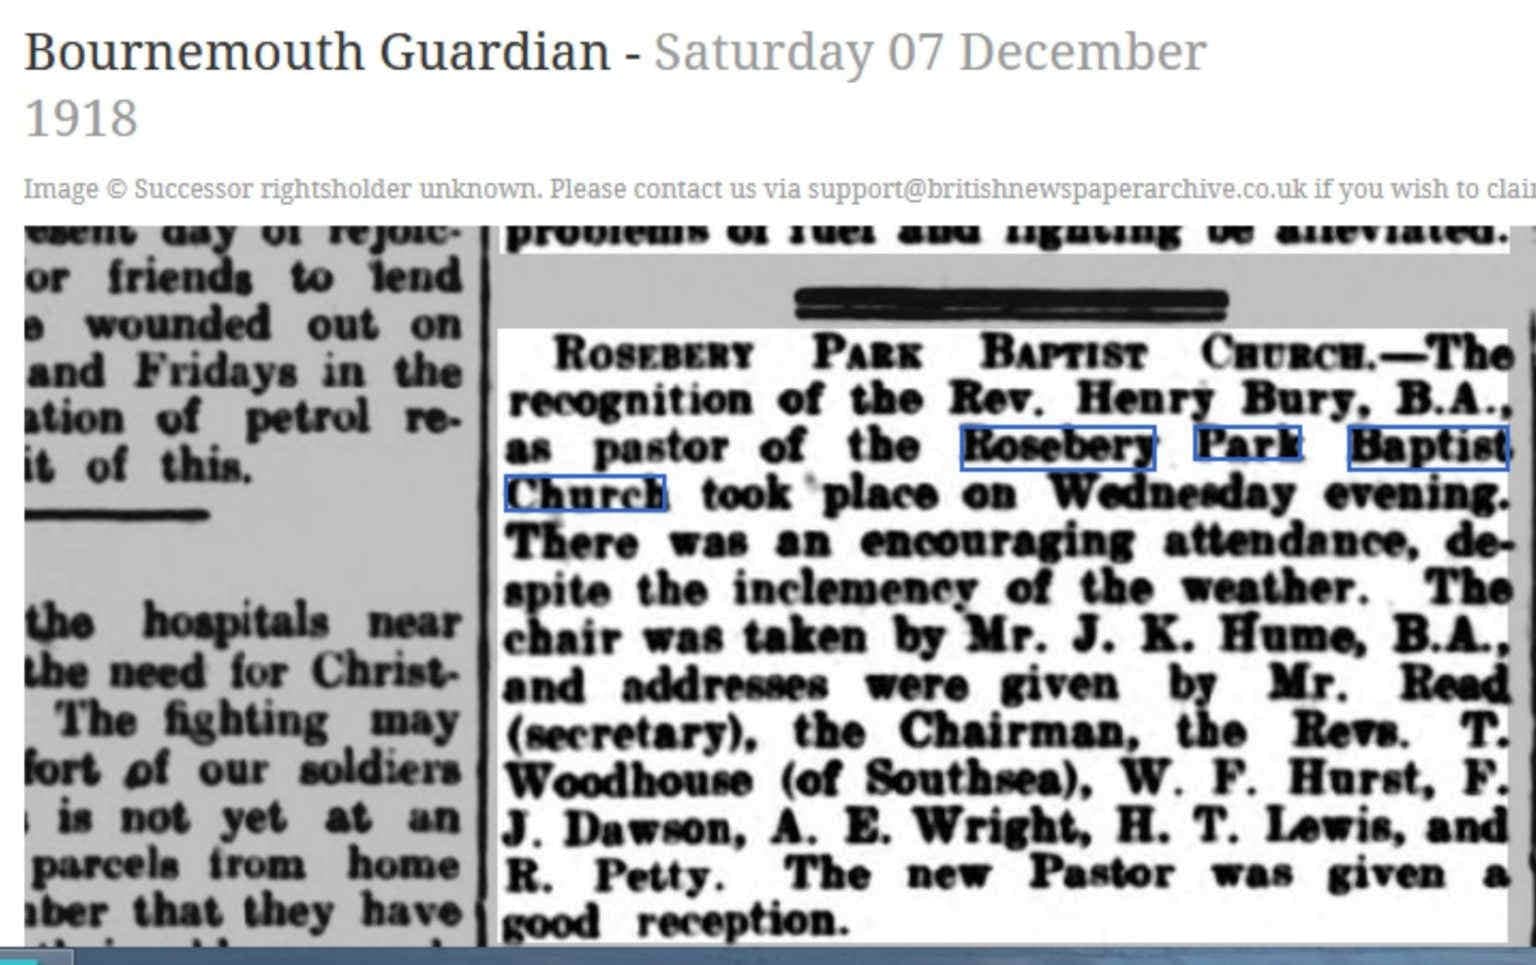 Bournemouth Guardian 1918 Henry Bury recognised as pastor RPBC